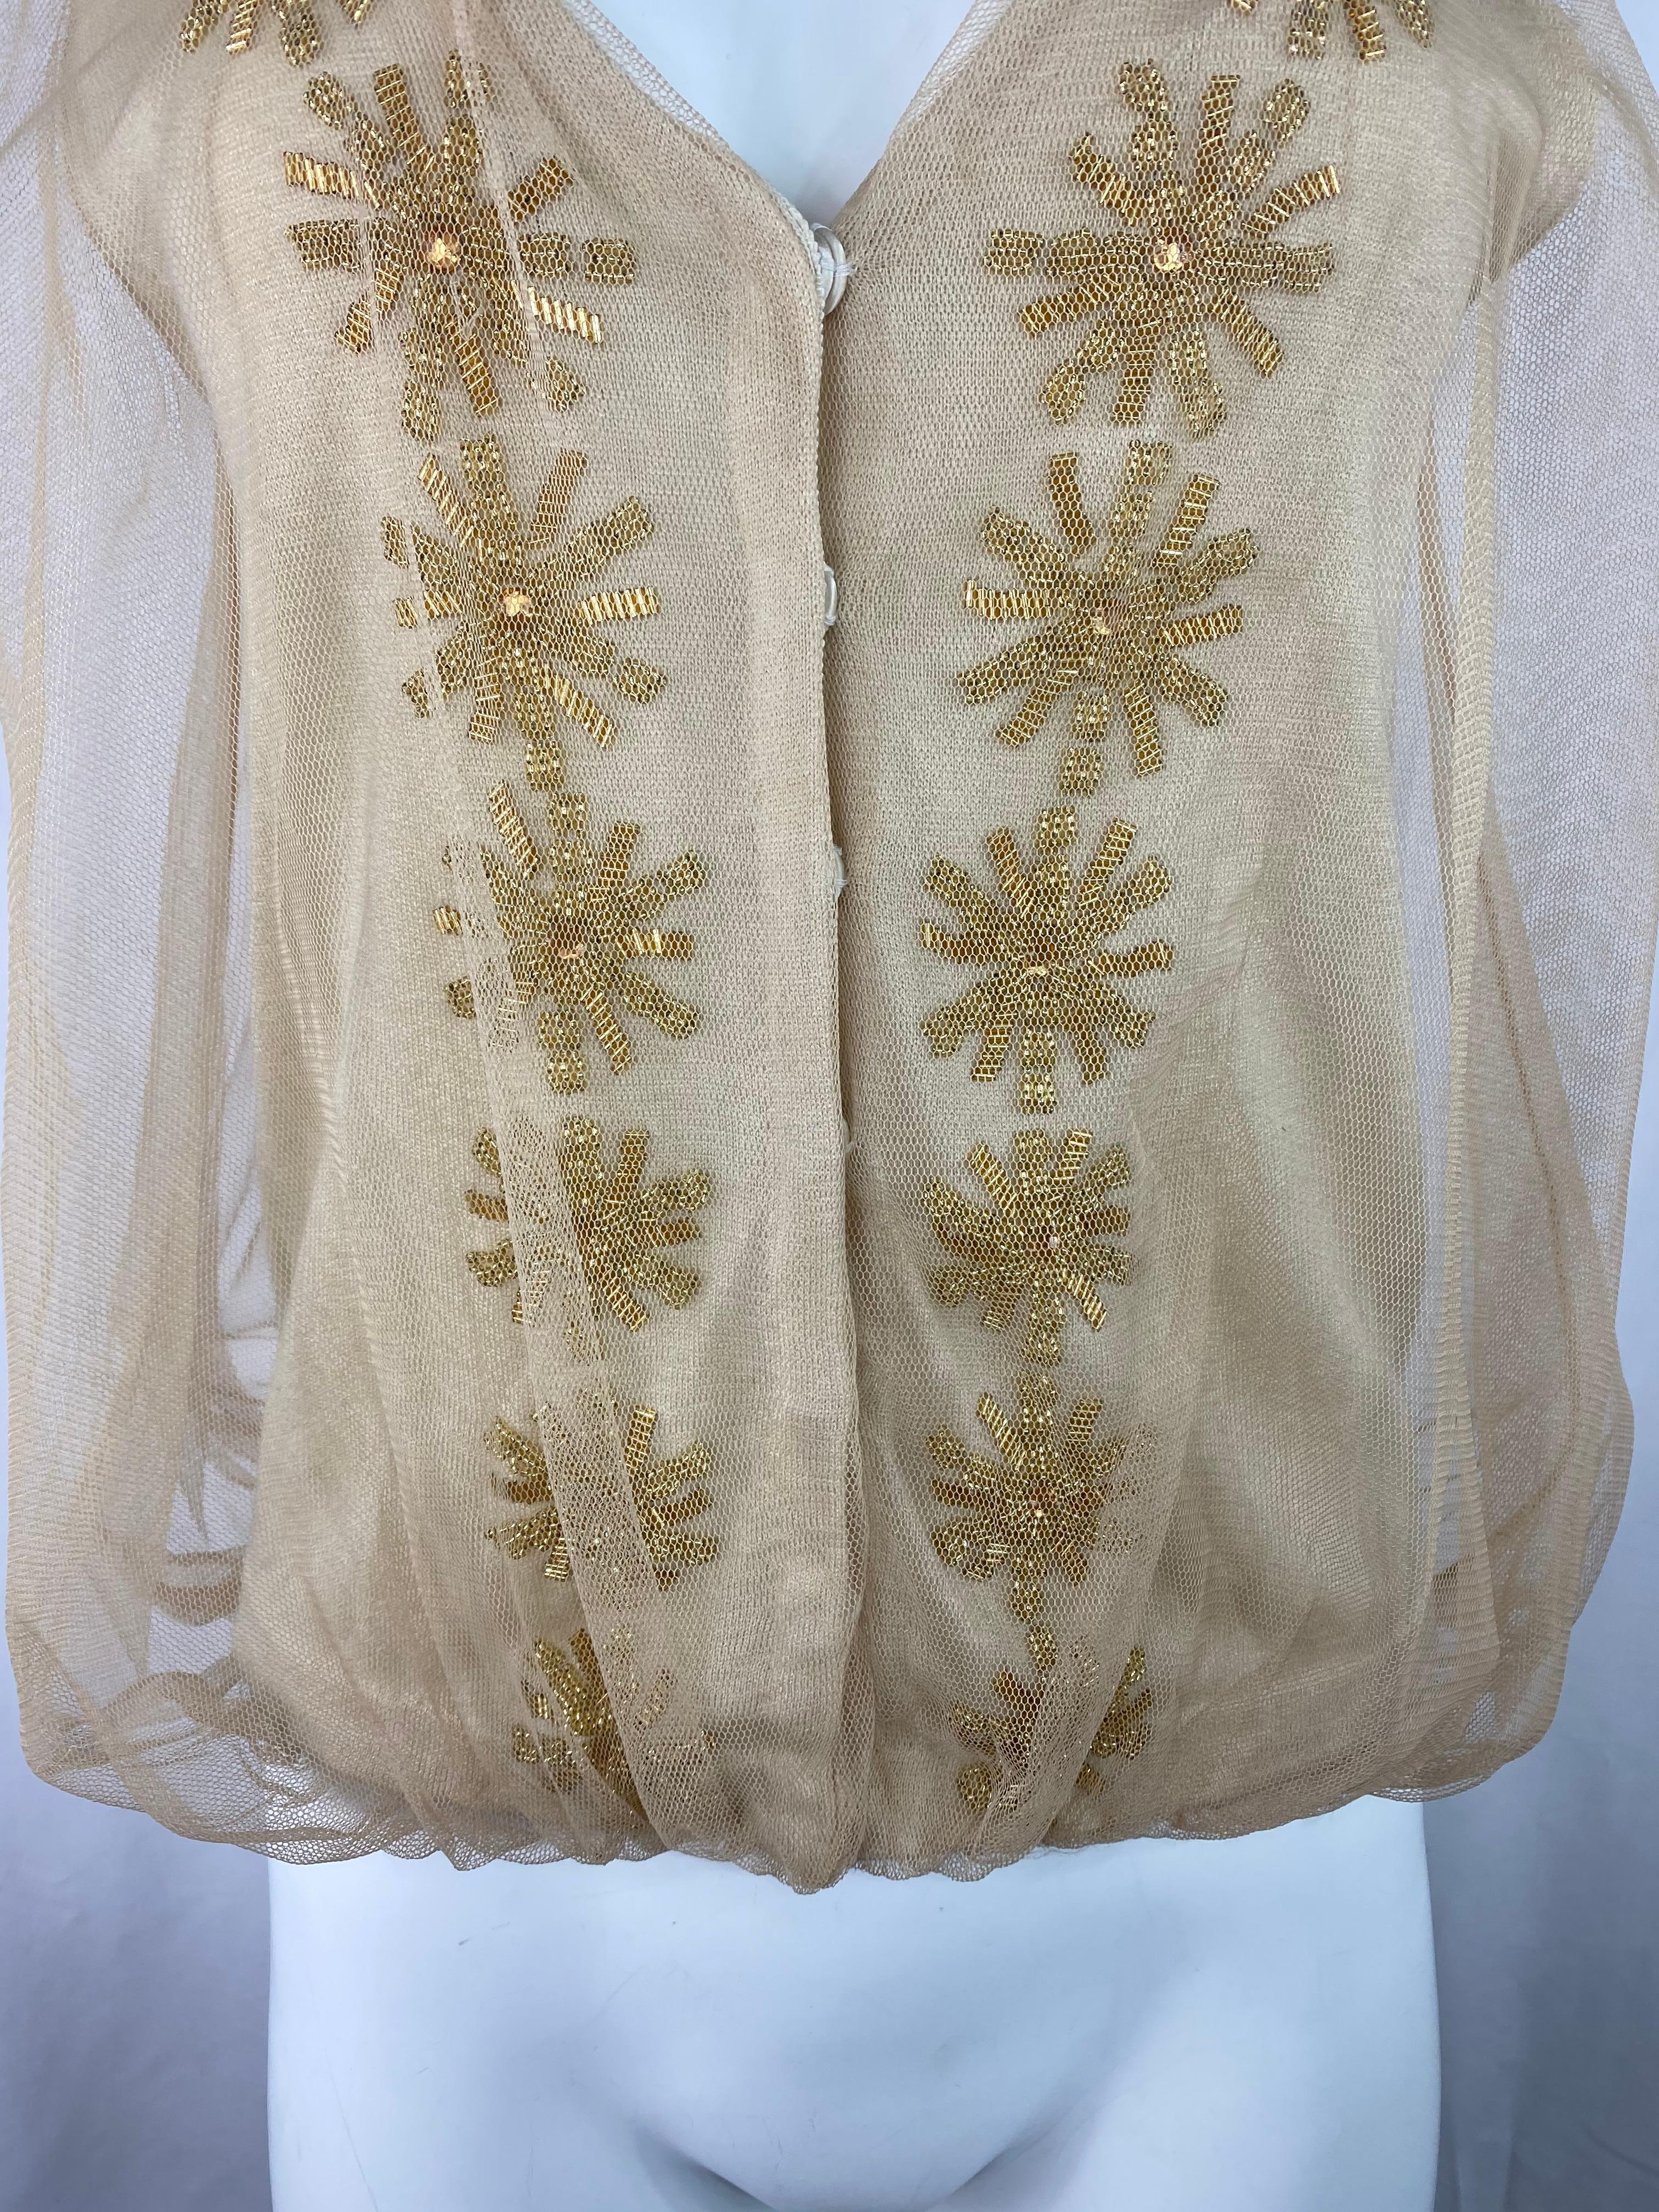 3.1 Phillip Lim Beige Knit and Tulle Vest Blouse Top, Size Small In Excellent Condition For Sale In Beverly Hills, CA